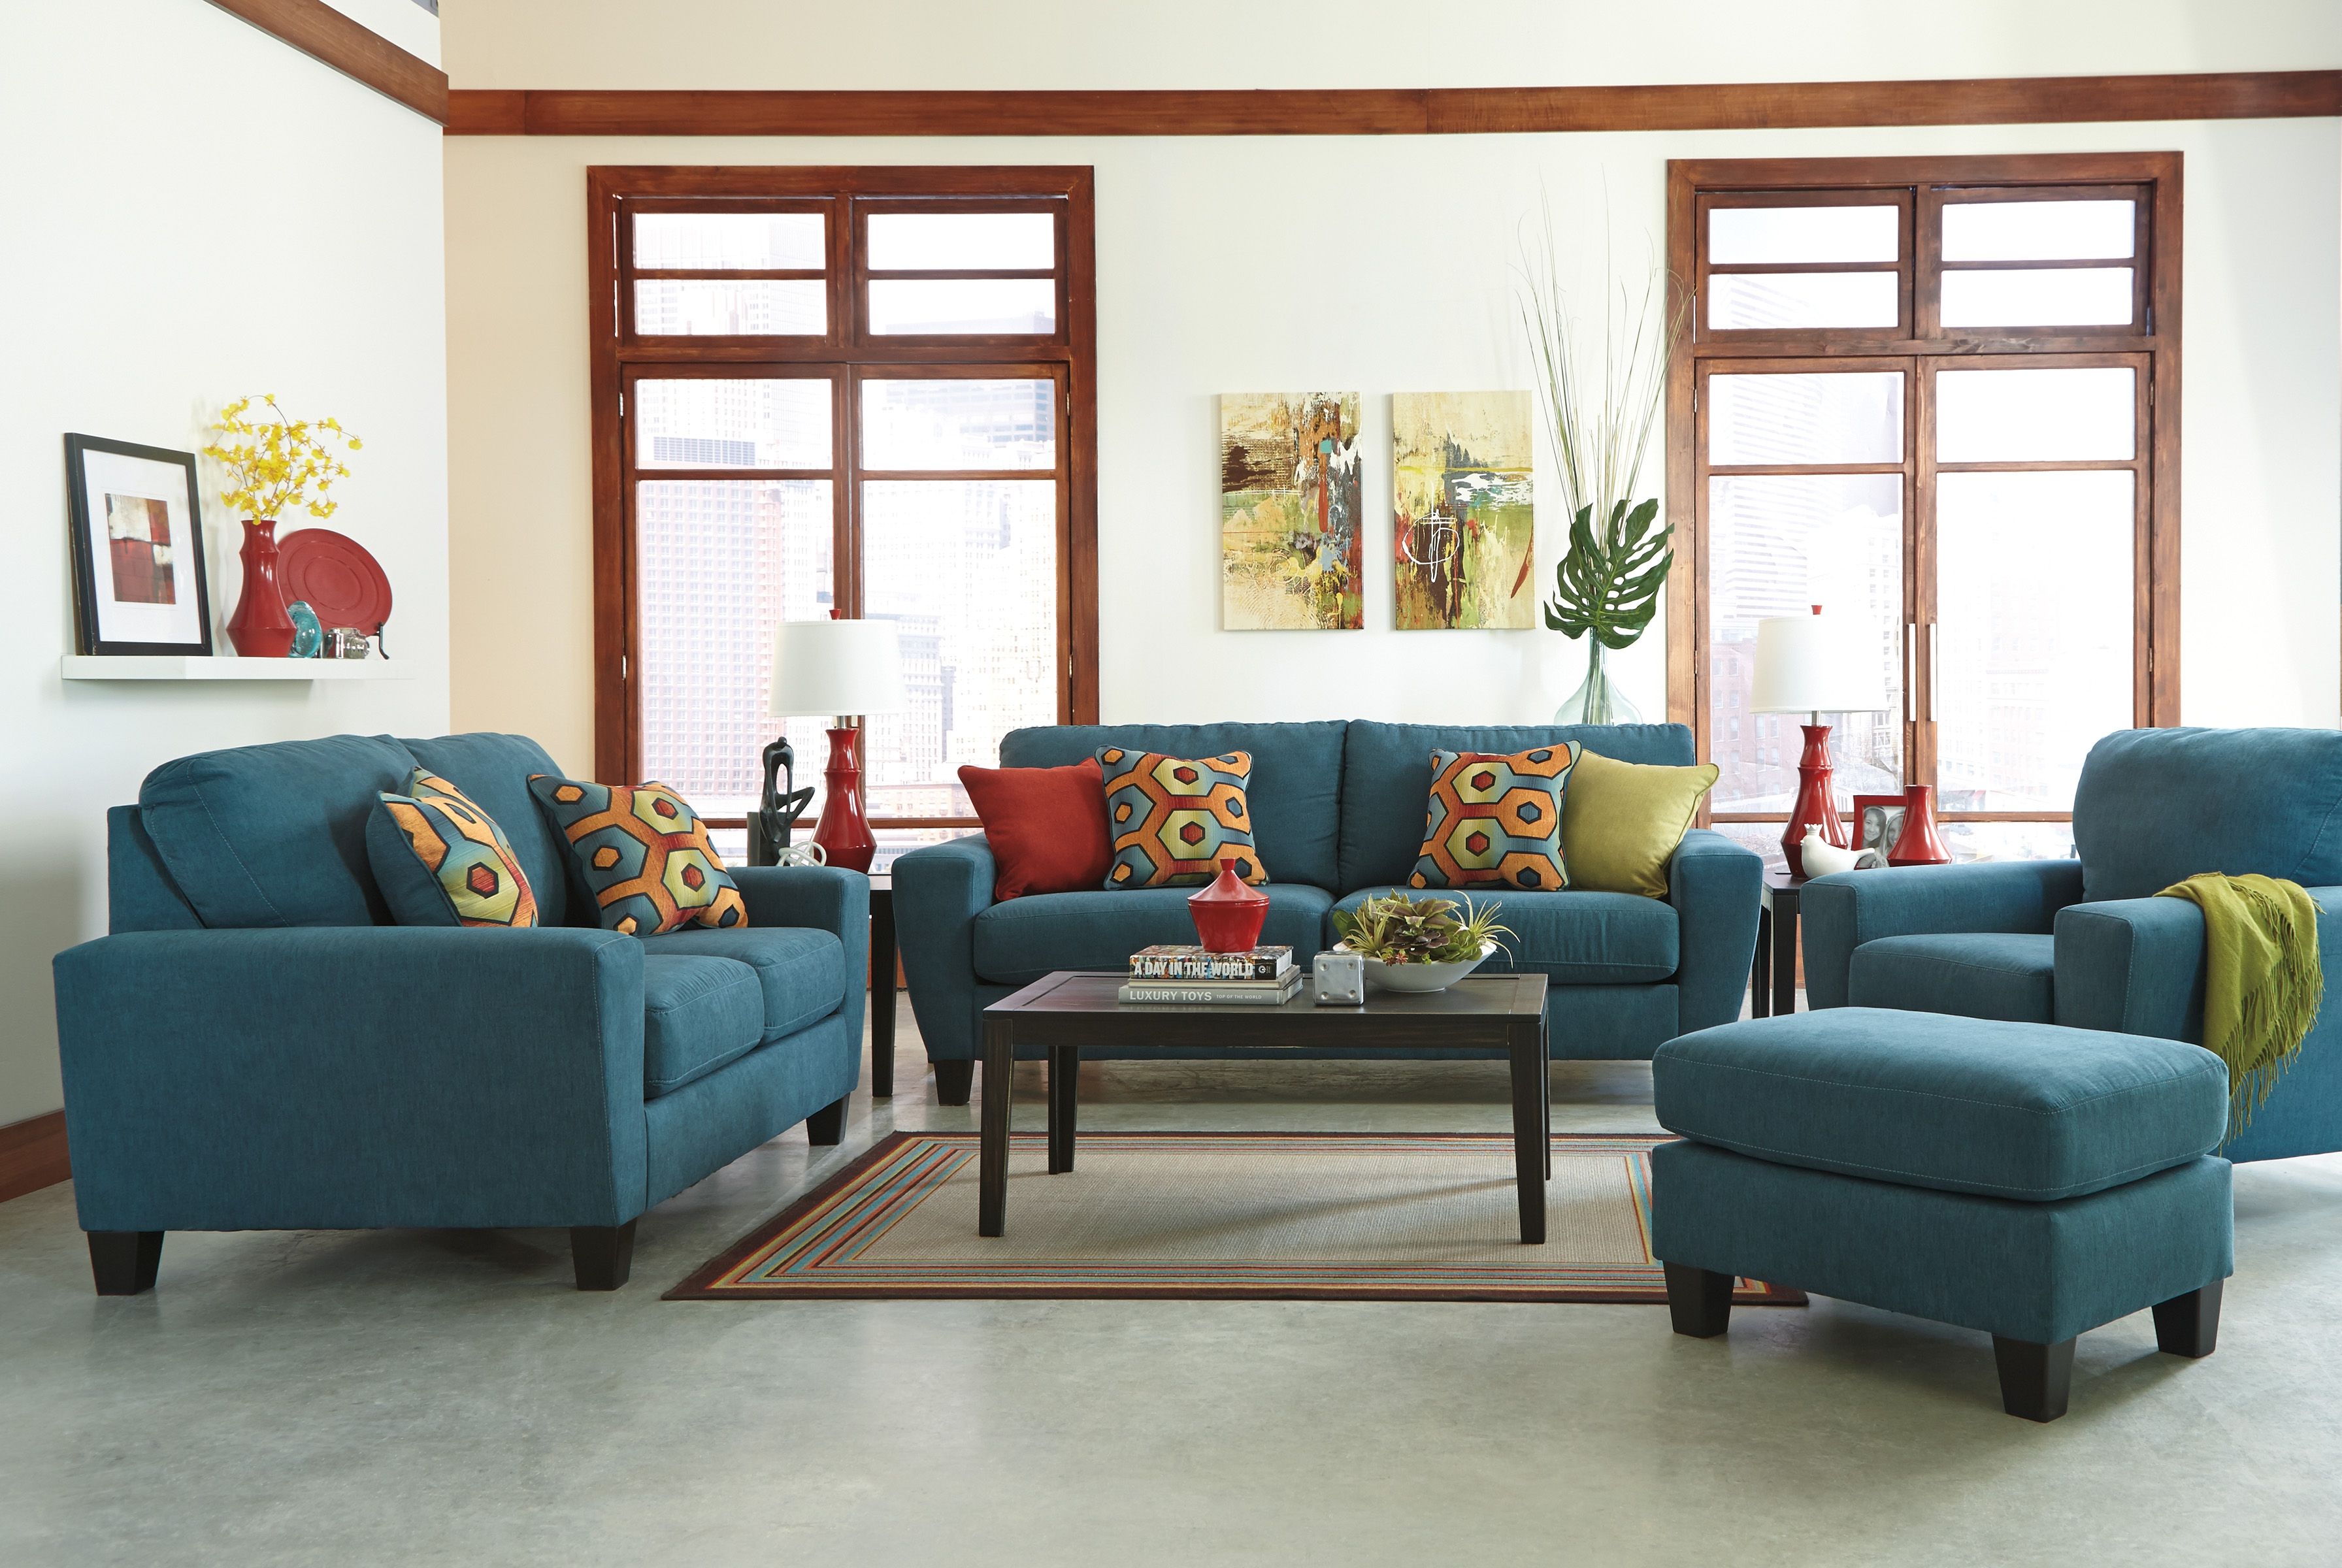 Sofa Loveseat And Chair Set Best Sofas Ideas Sofascouch Intended For Sofa And Chair Set (View 11 of 15)